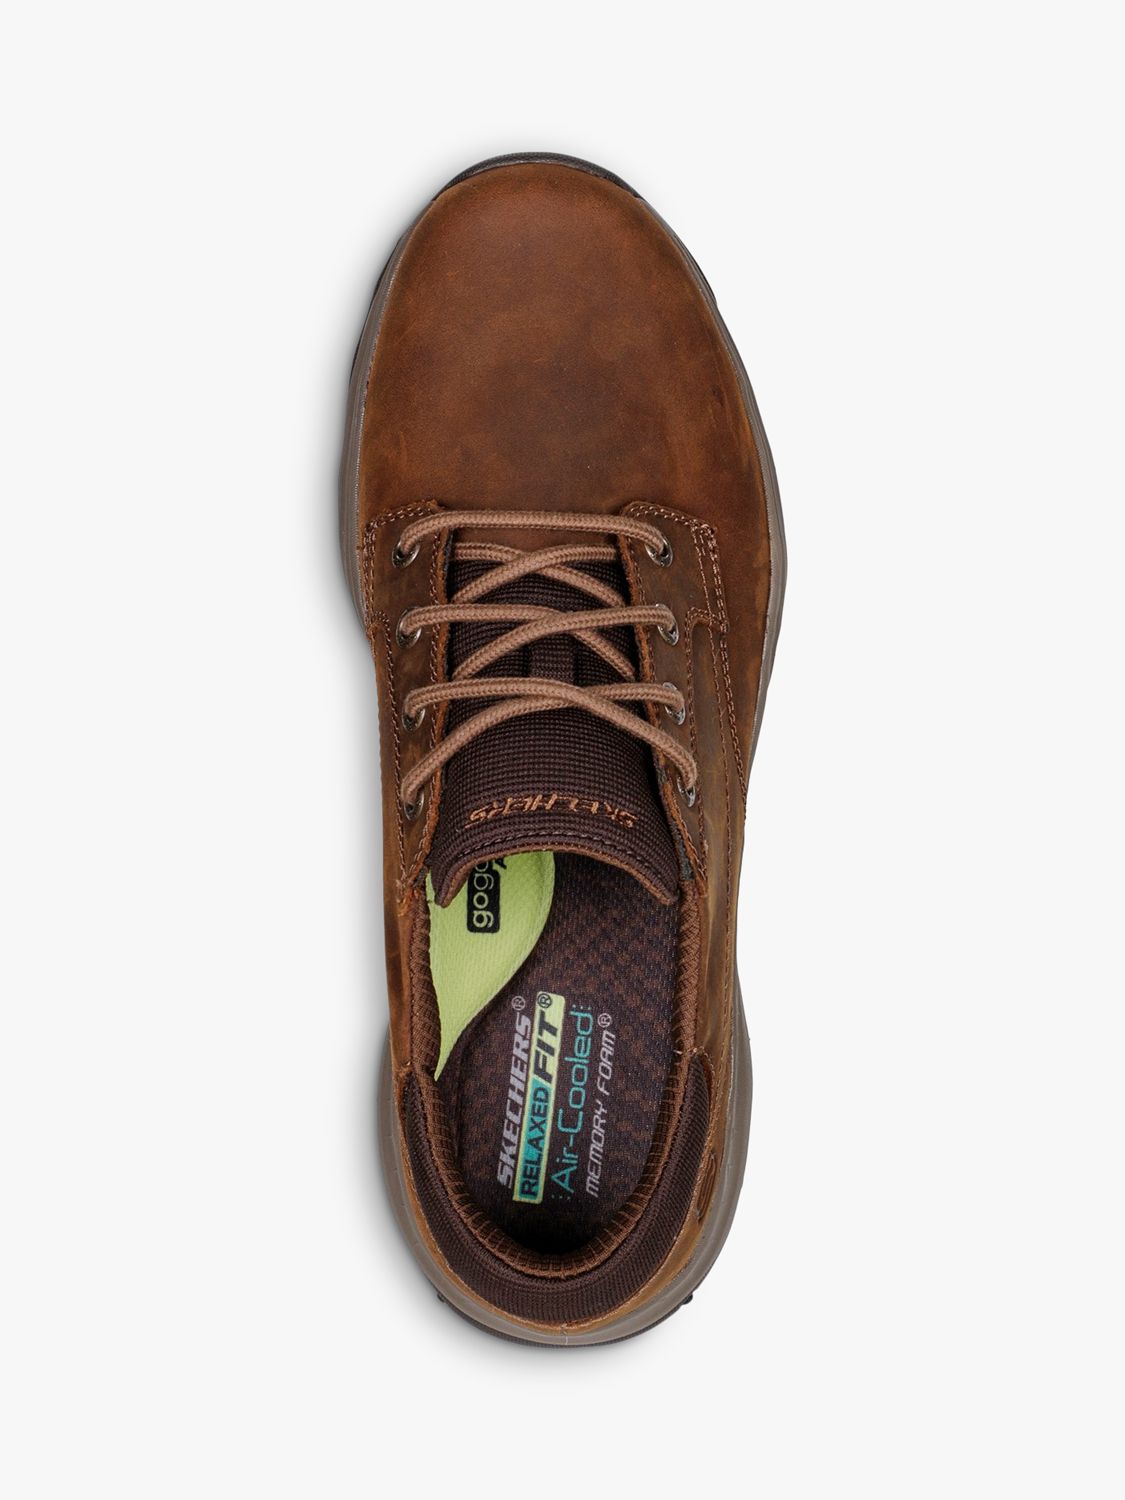 Skechers Relaxed Fit Craster Fenzo Shoes, Dark Brown at John Lewis ...